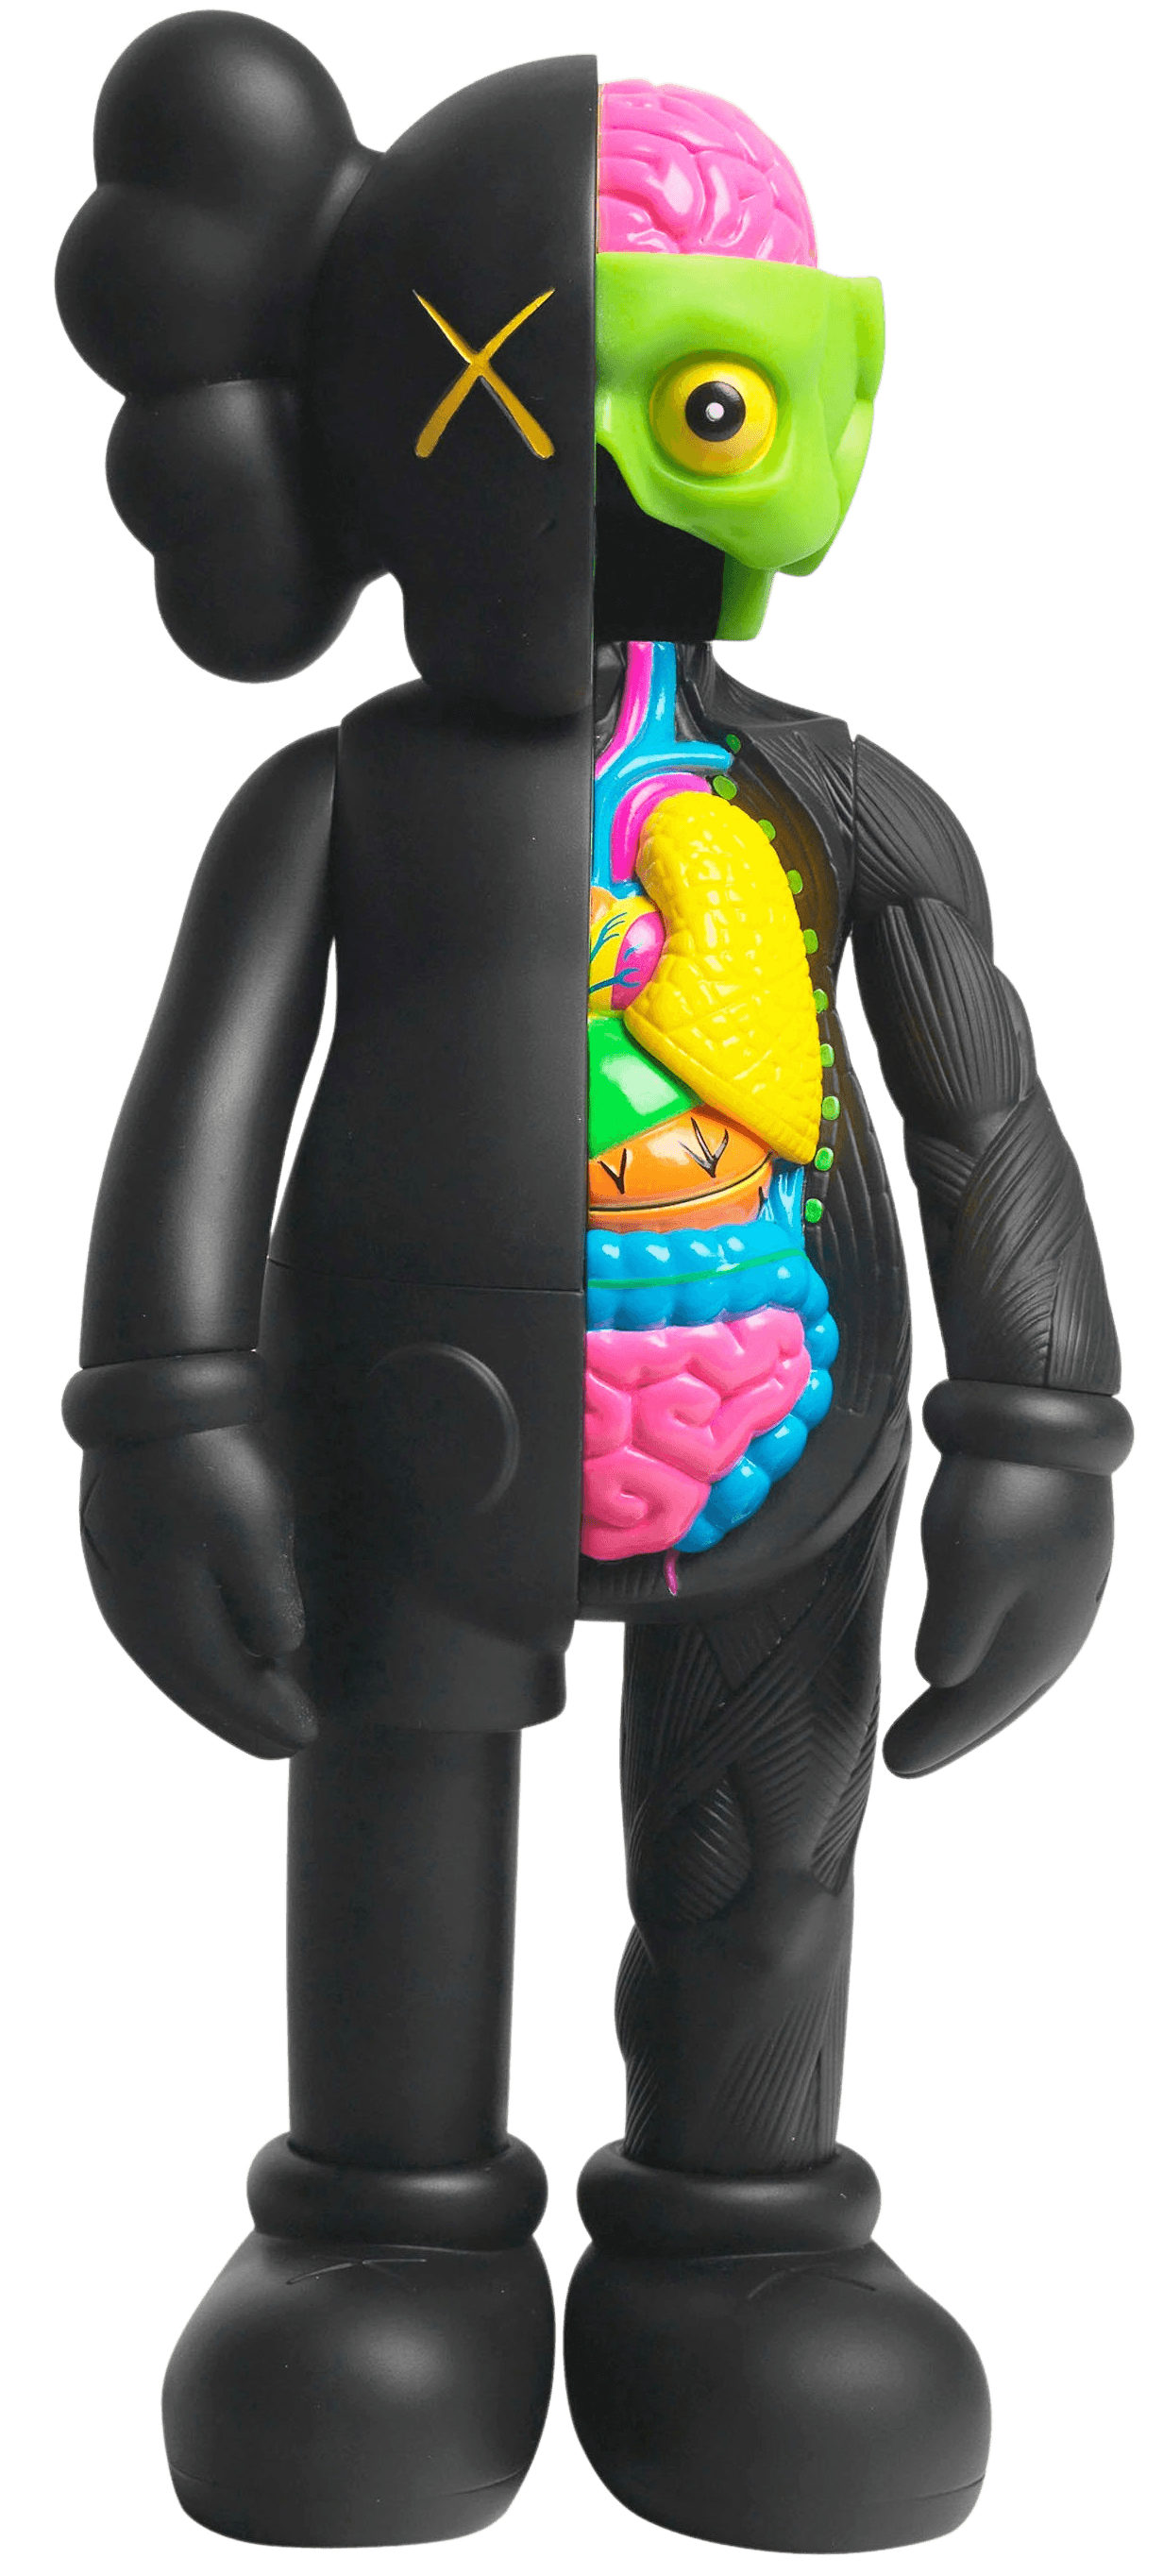 KAWS | KAWS COMPANION 2016 black (black KAWS Companion) (2016 ) | Available  for Sale | Artsy